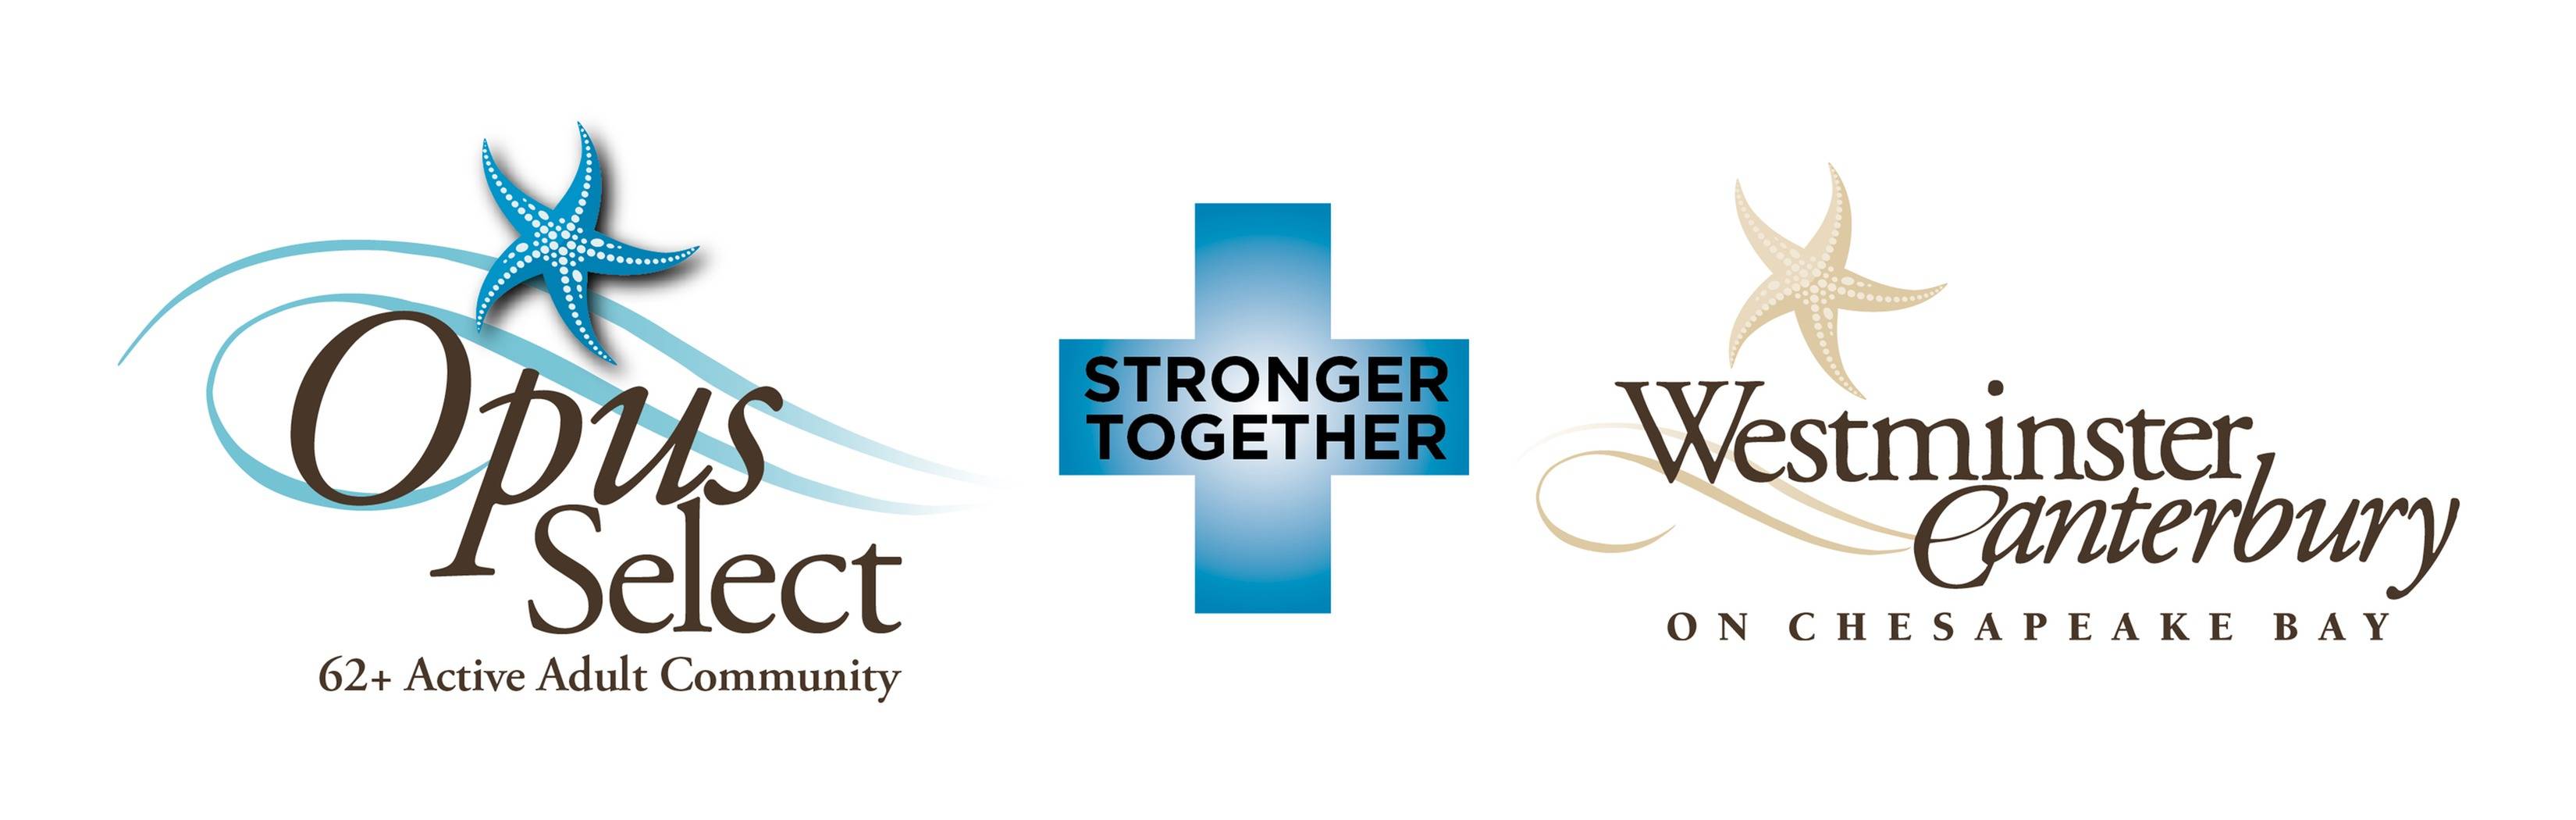 Stronger Together | Opus Select Apartments